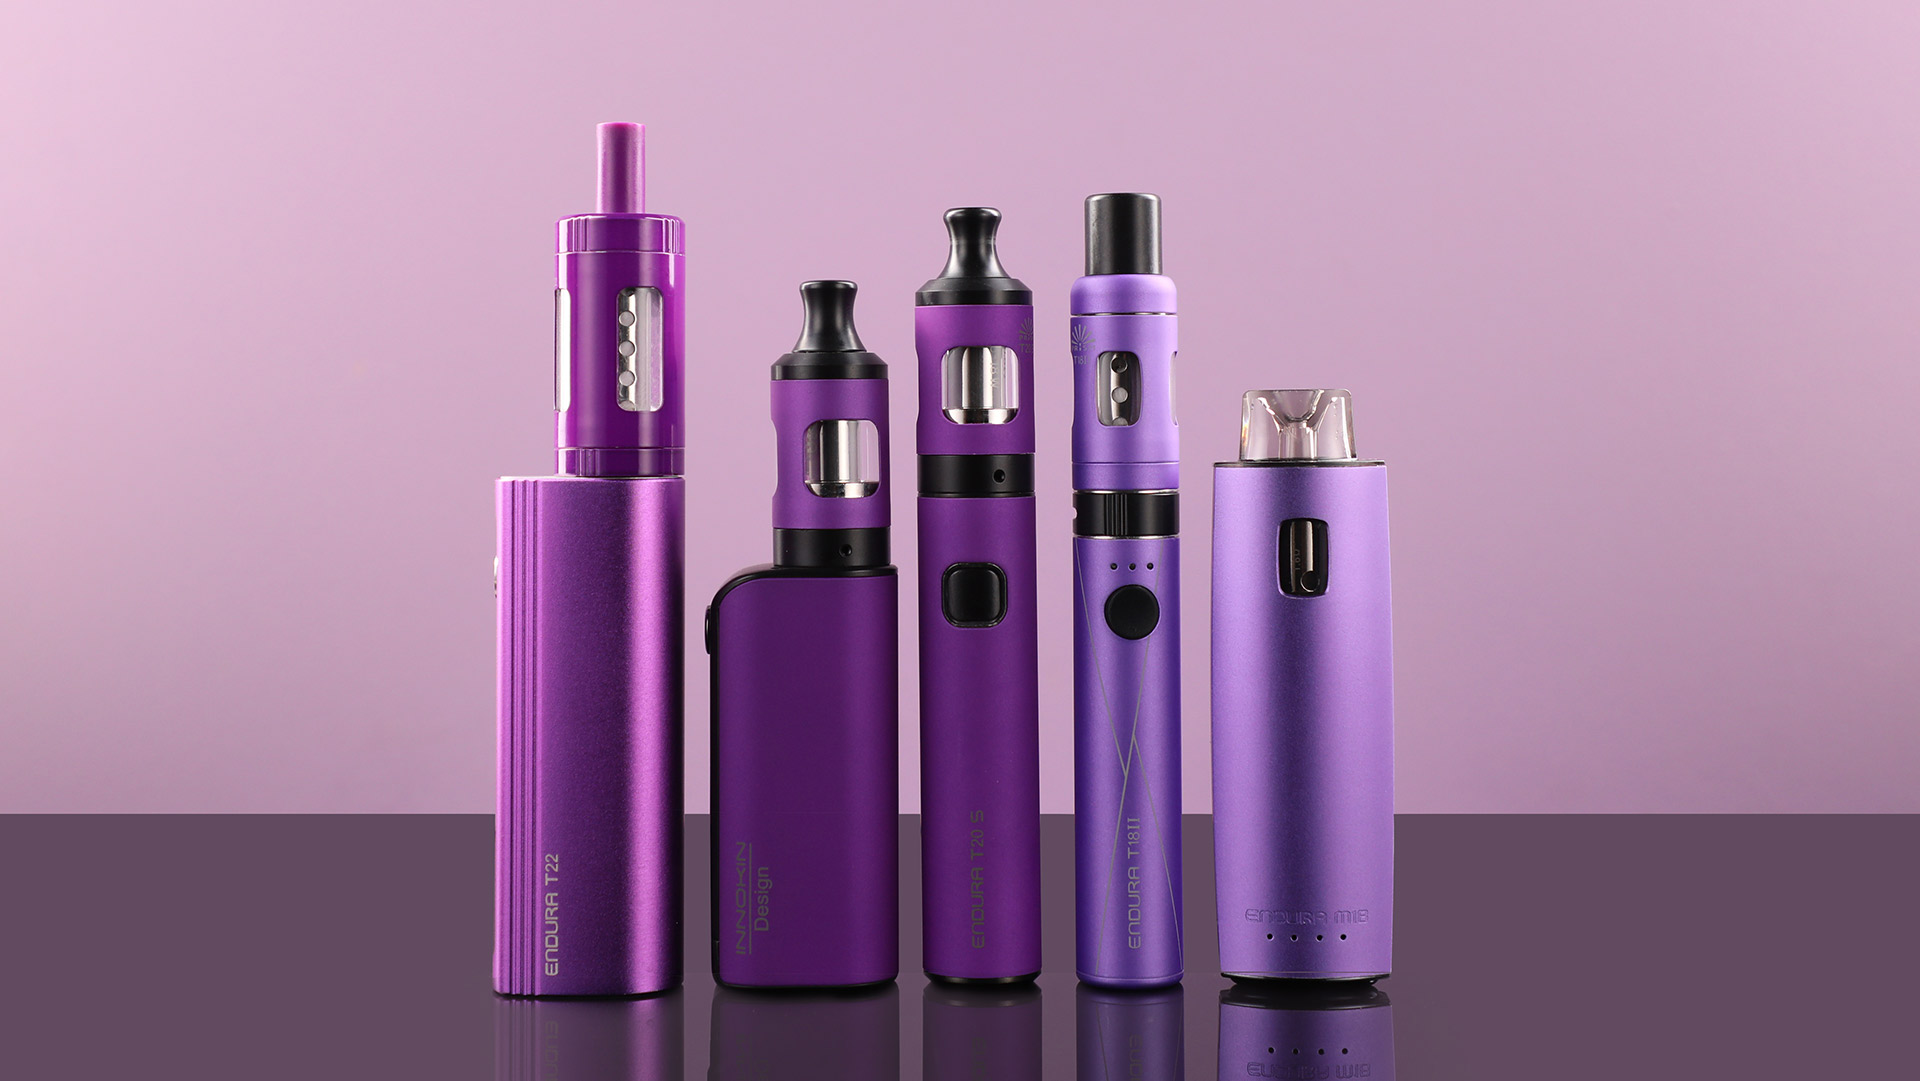 How much are vaporizers